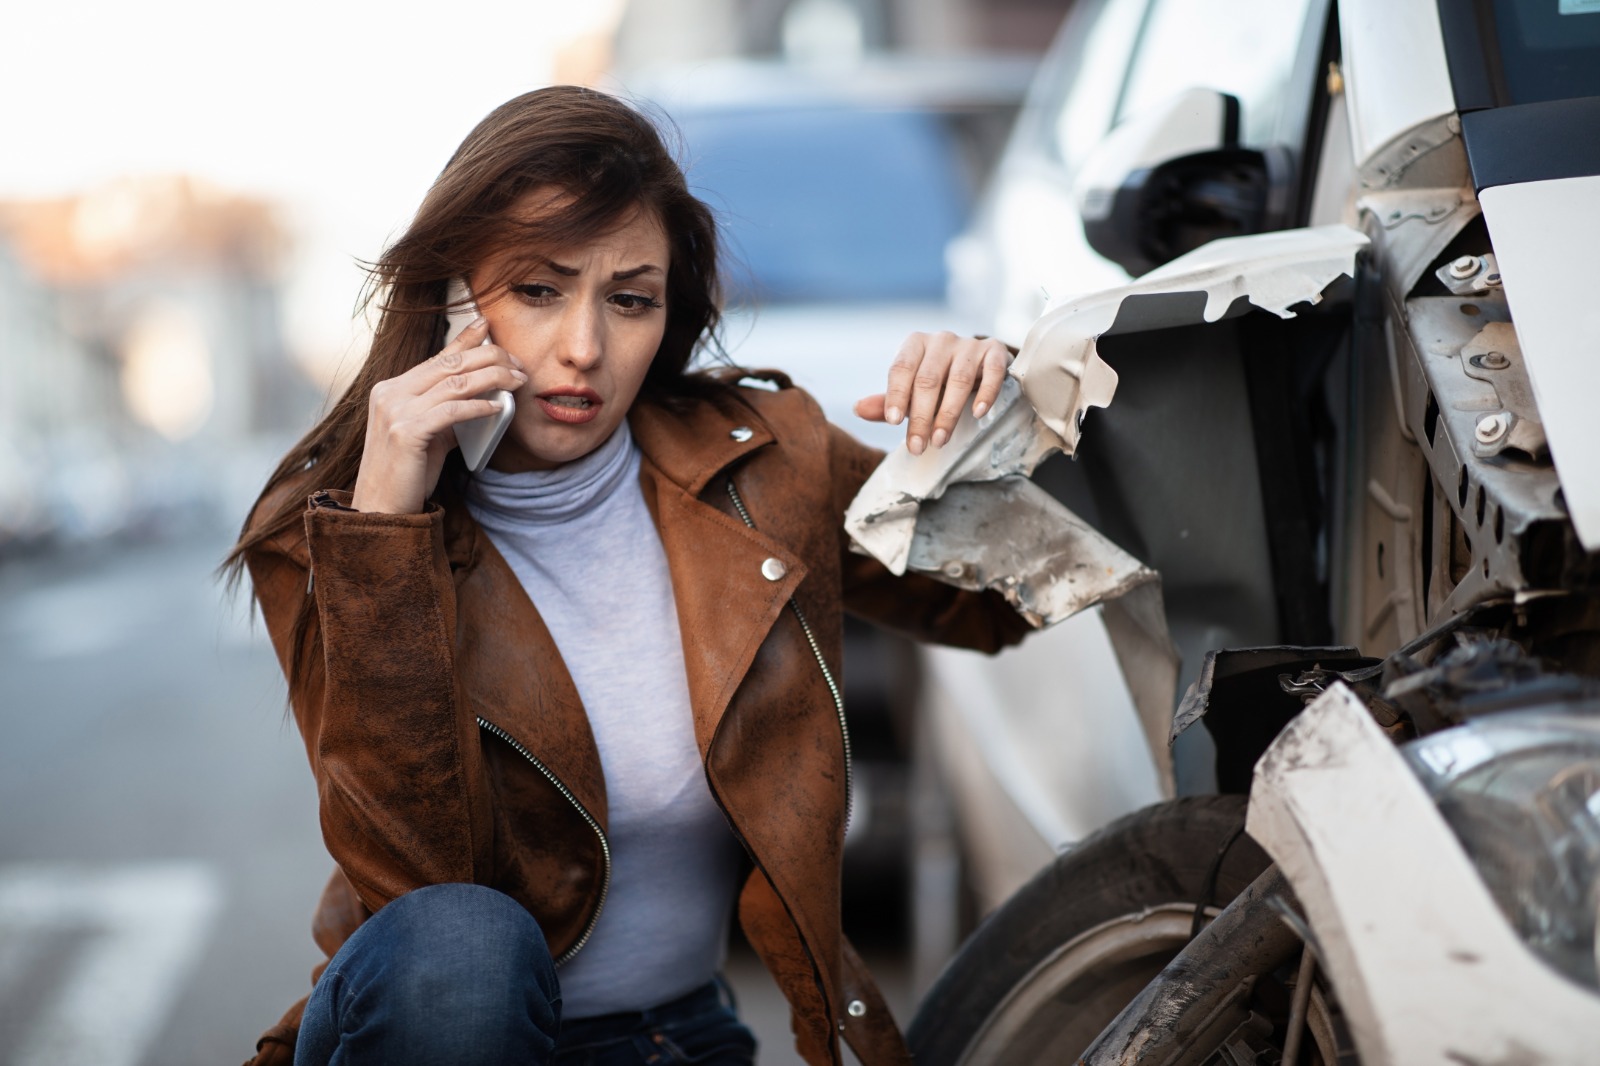 Don’t Let a Car Accident Derail Your Life: How a Good Auto Lawyer Can Help You Move Forward